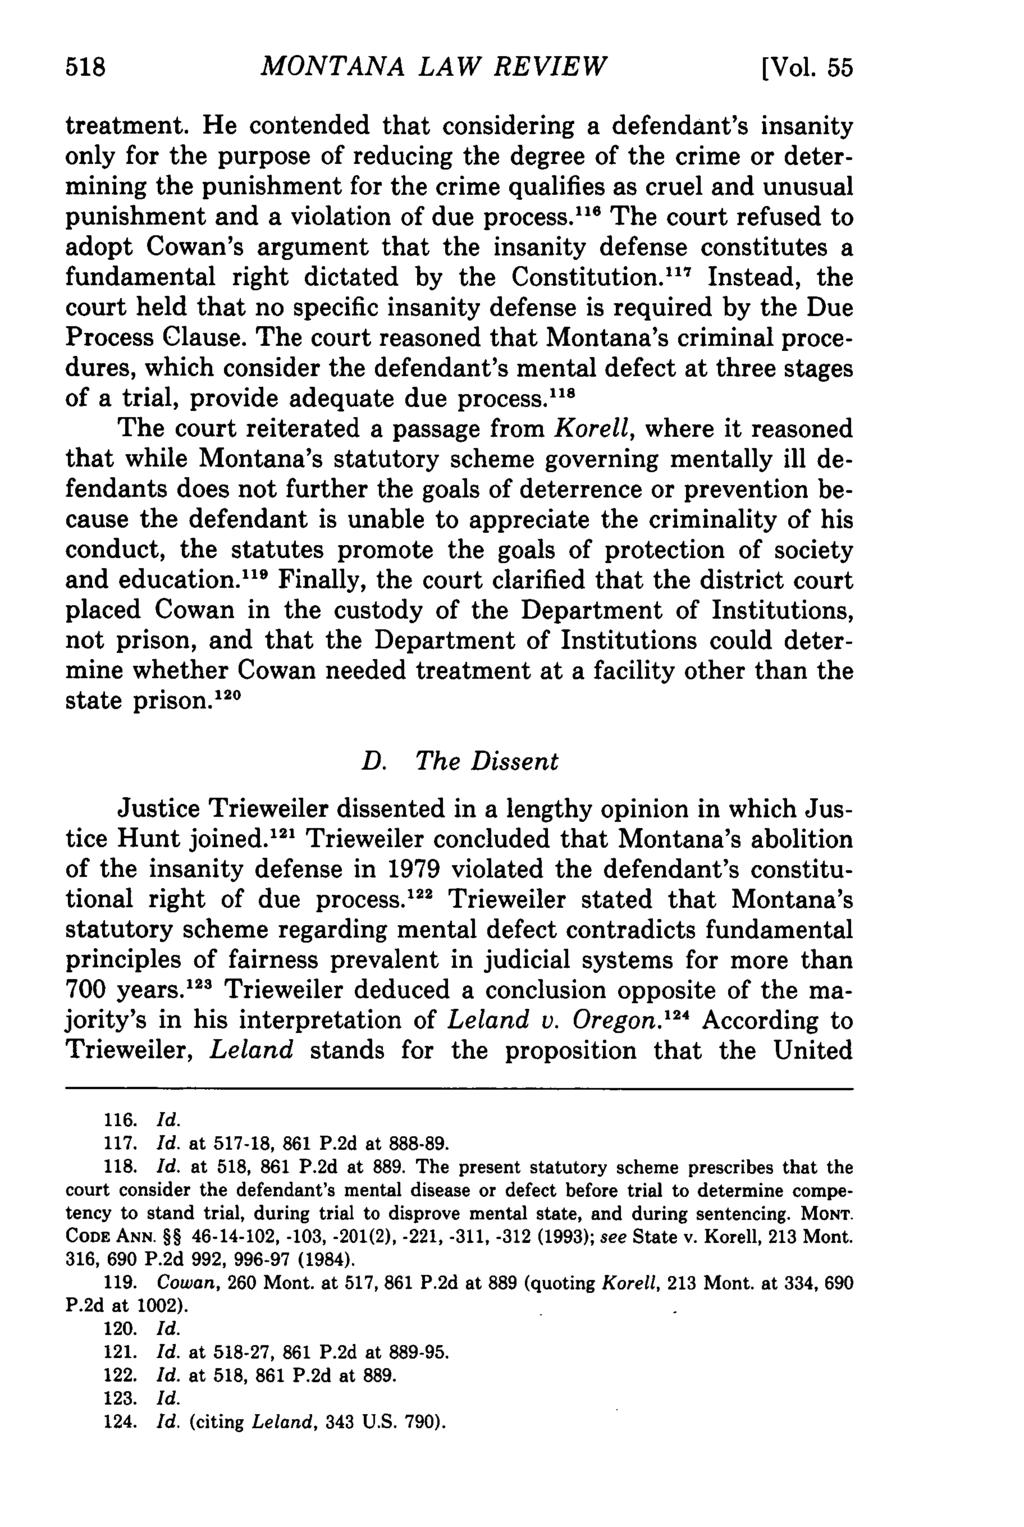 518 Montana MONTANA Law Review, LAW Vol. REVIEW 55 [1994], Iss. 2, Art. 12 [Vol. 55 treatment.